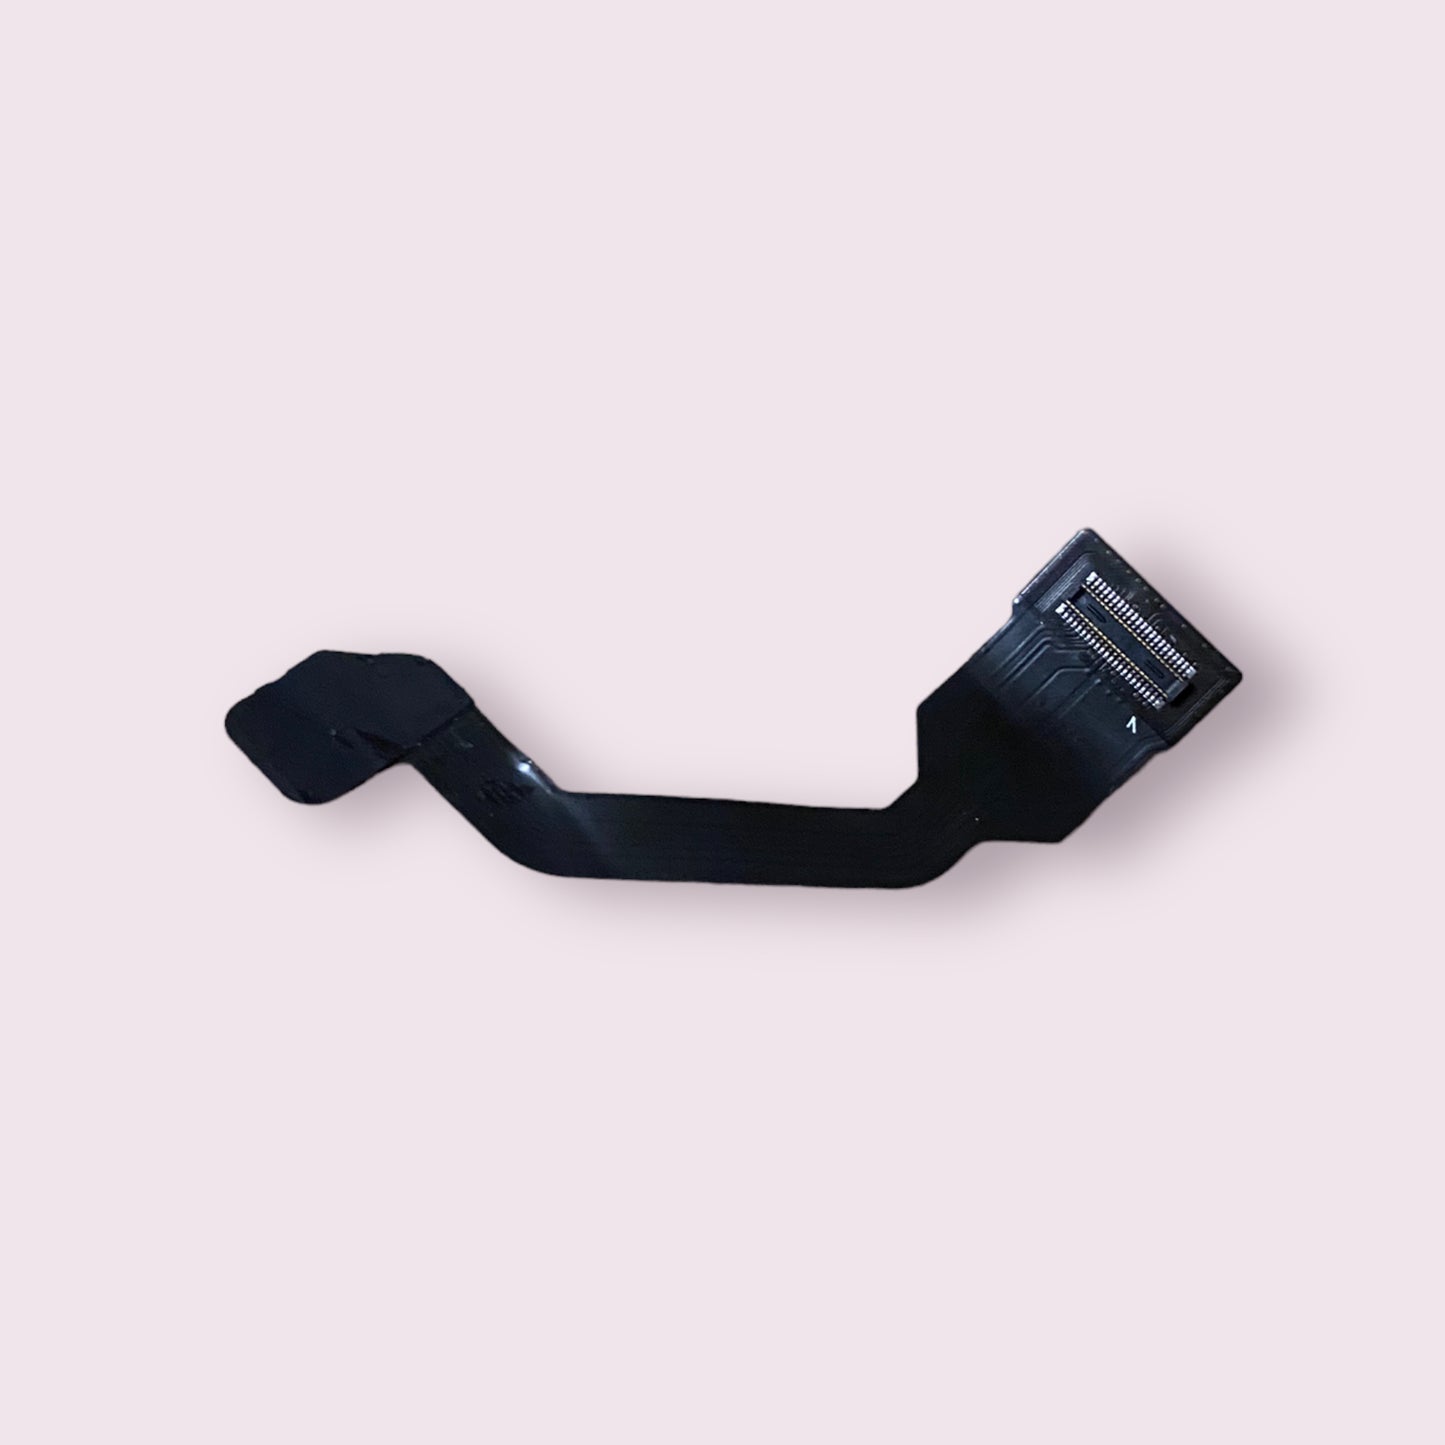 MacBook Pro 13” A1989 2018 Keyboard flex cable 821-01699-A - Genuine Pull Part